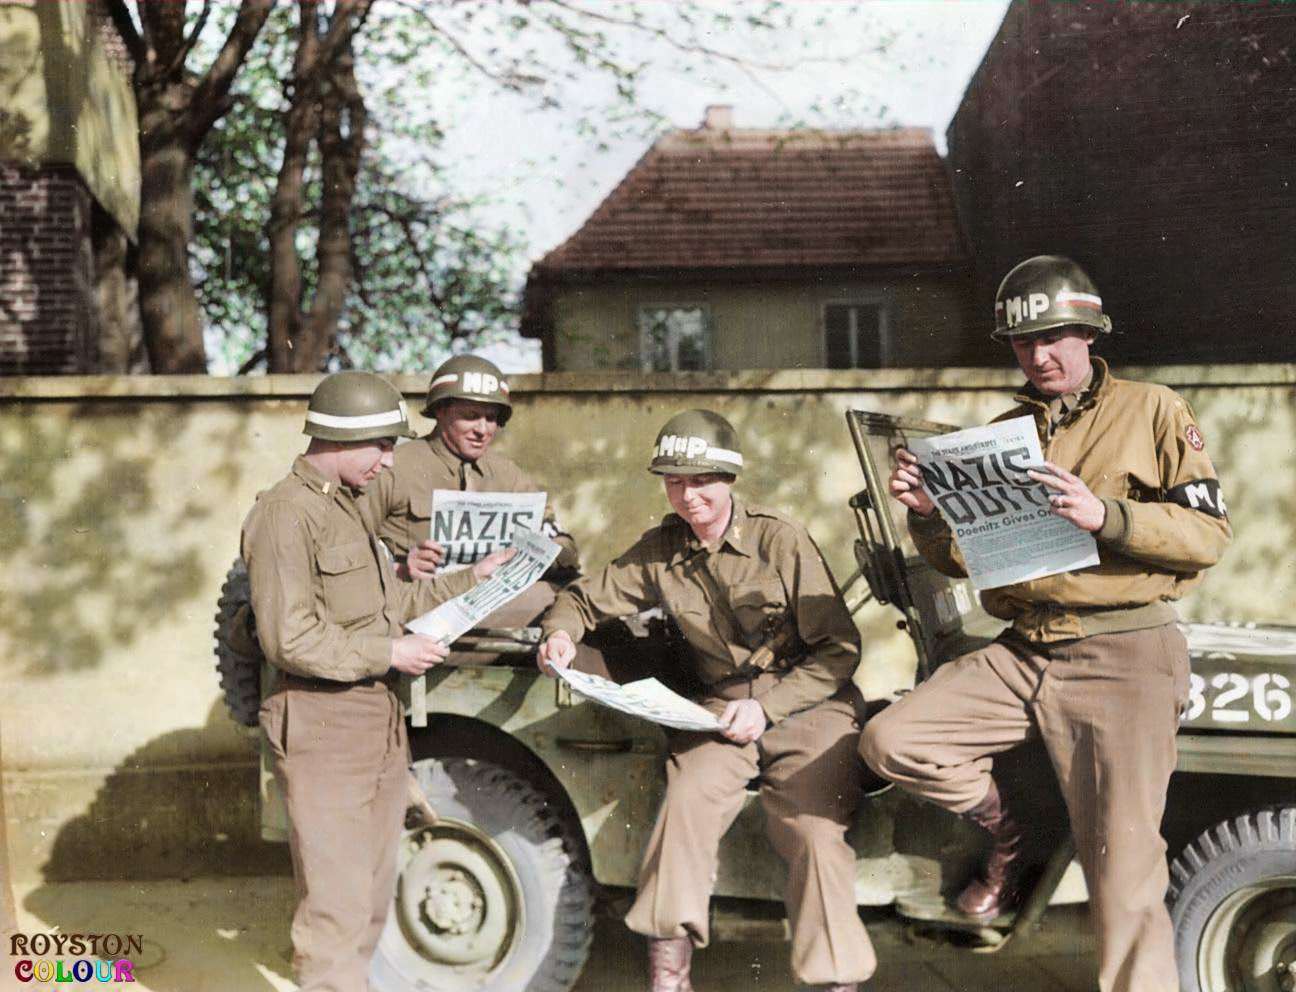 9th Army MPs reading of the surrender in the 'Stars and Stripes' in Germany on the 8th of May 1945